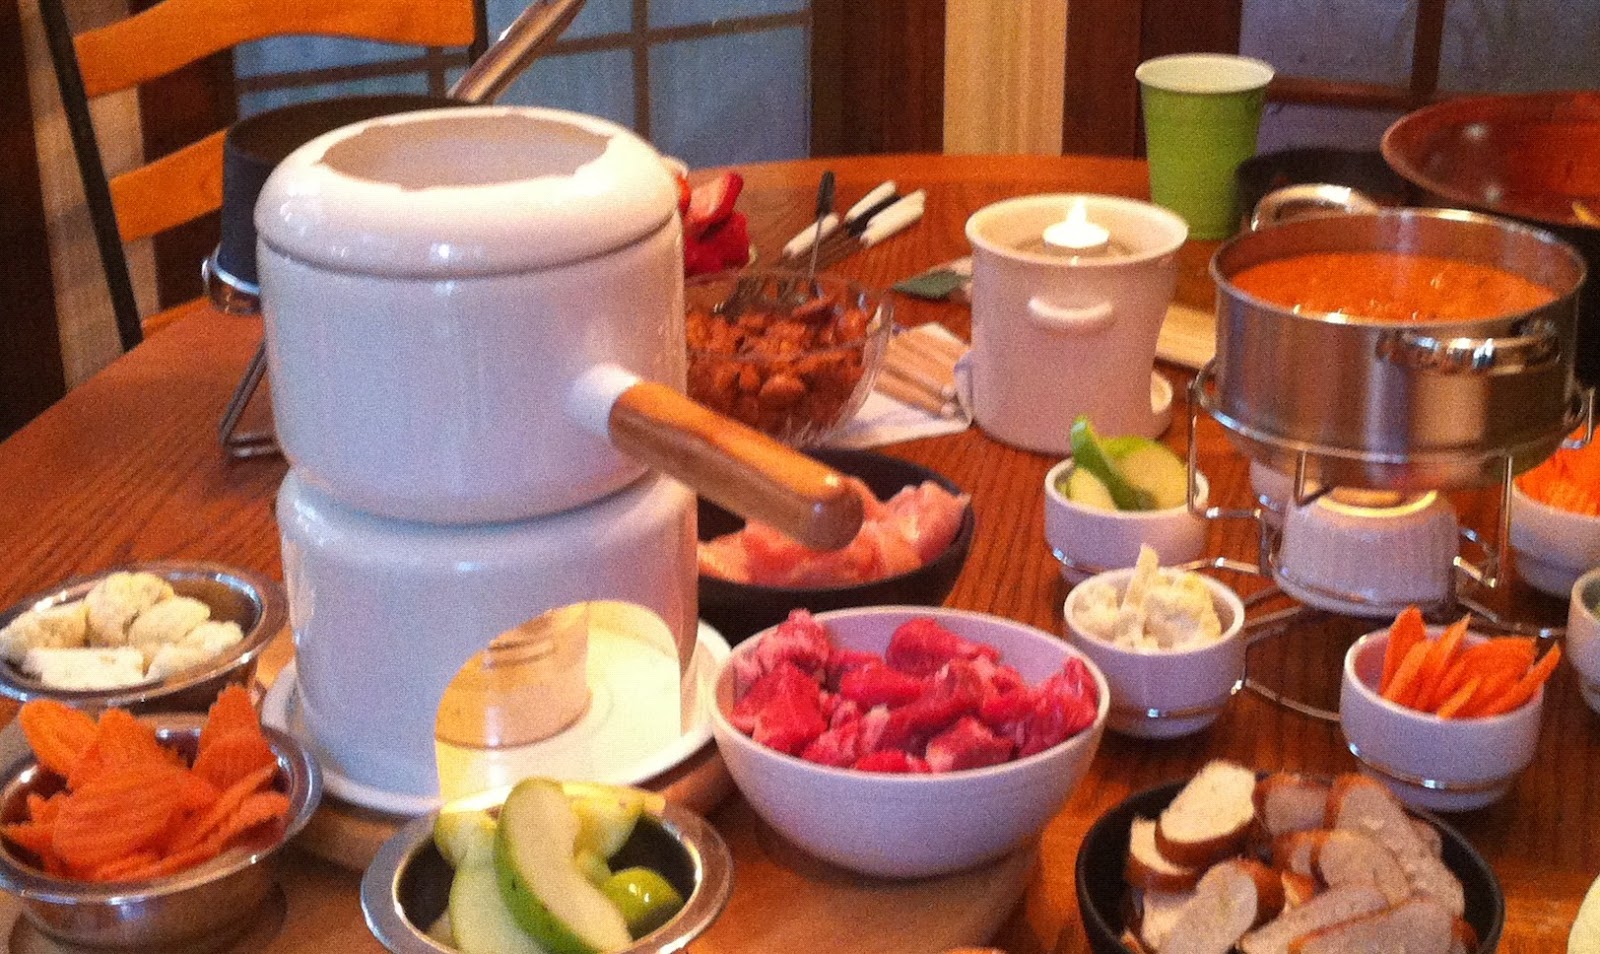 What are some fondue recipes using cheese?